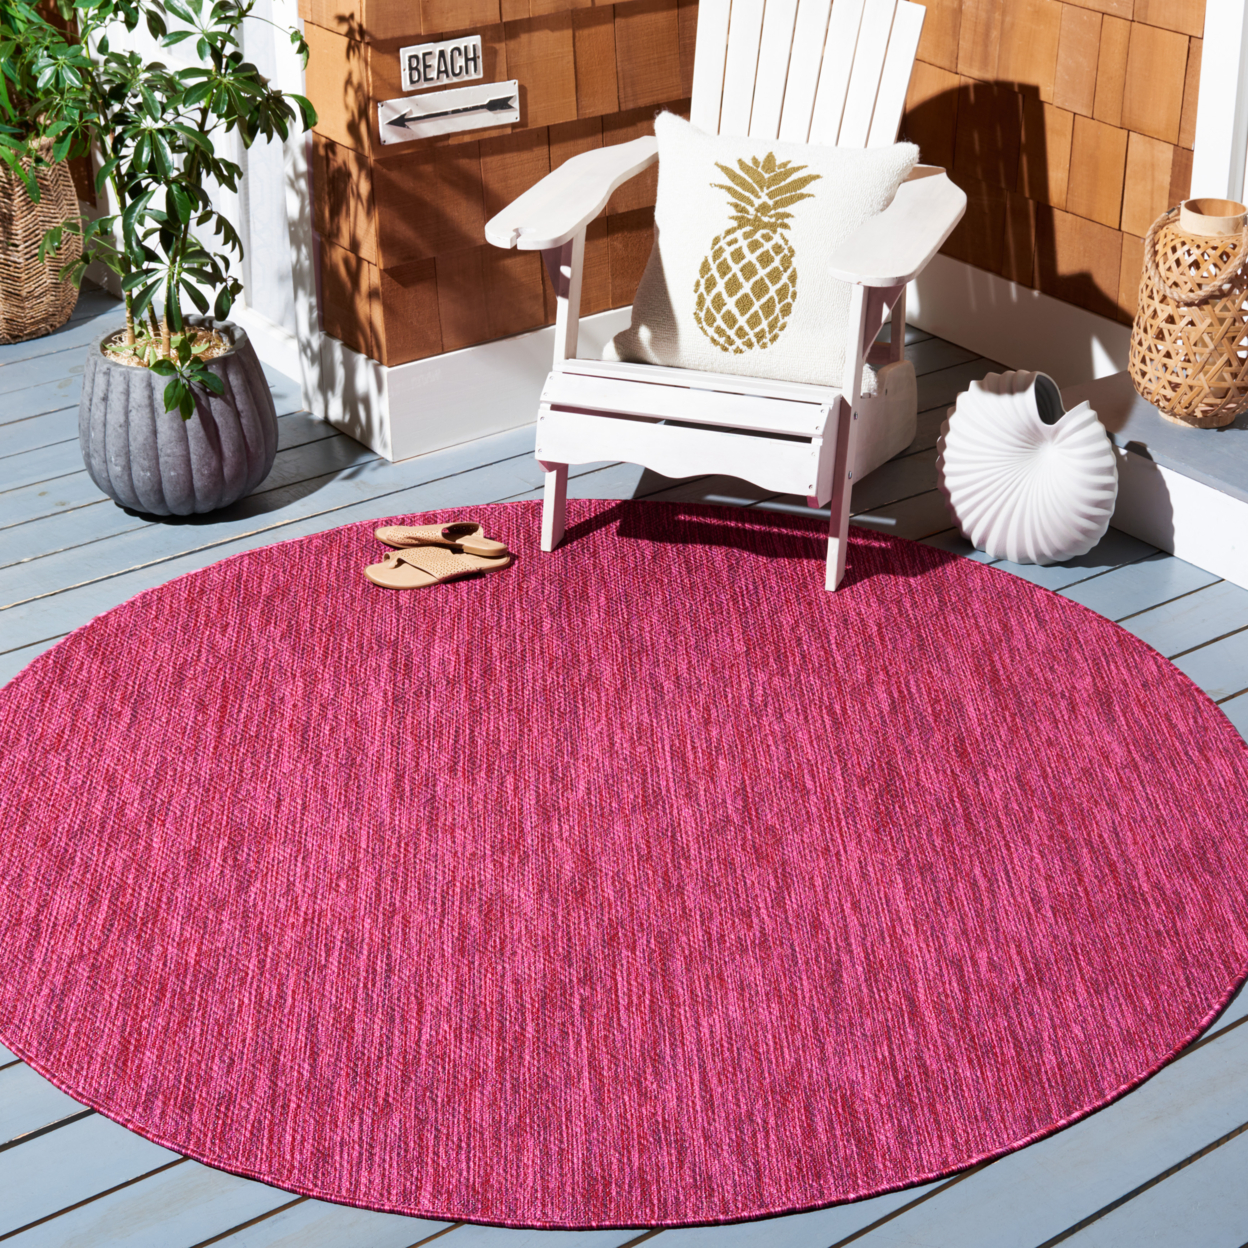 SAFAVIEH Outdoor CY8520-55922 Courtyard Collection Red Rug - 2' 7 X 5'